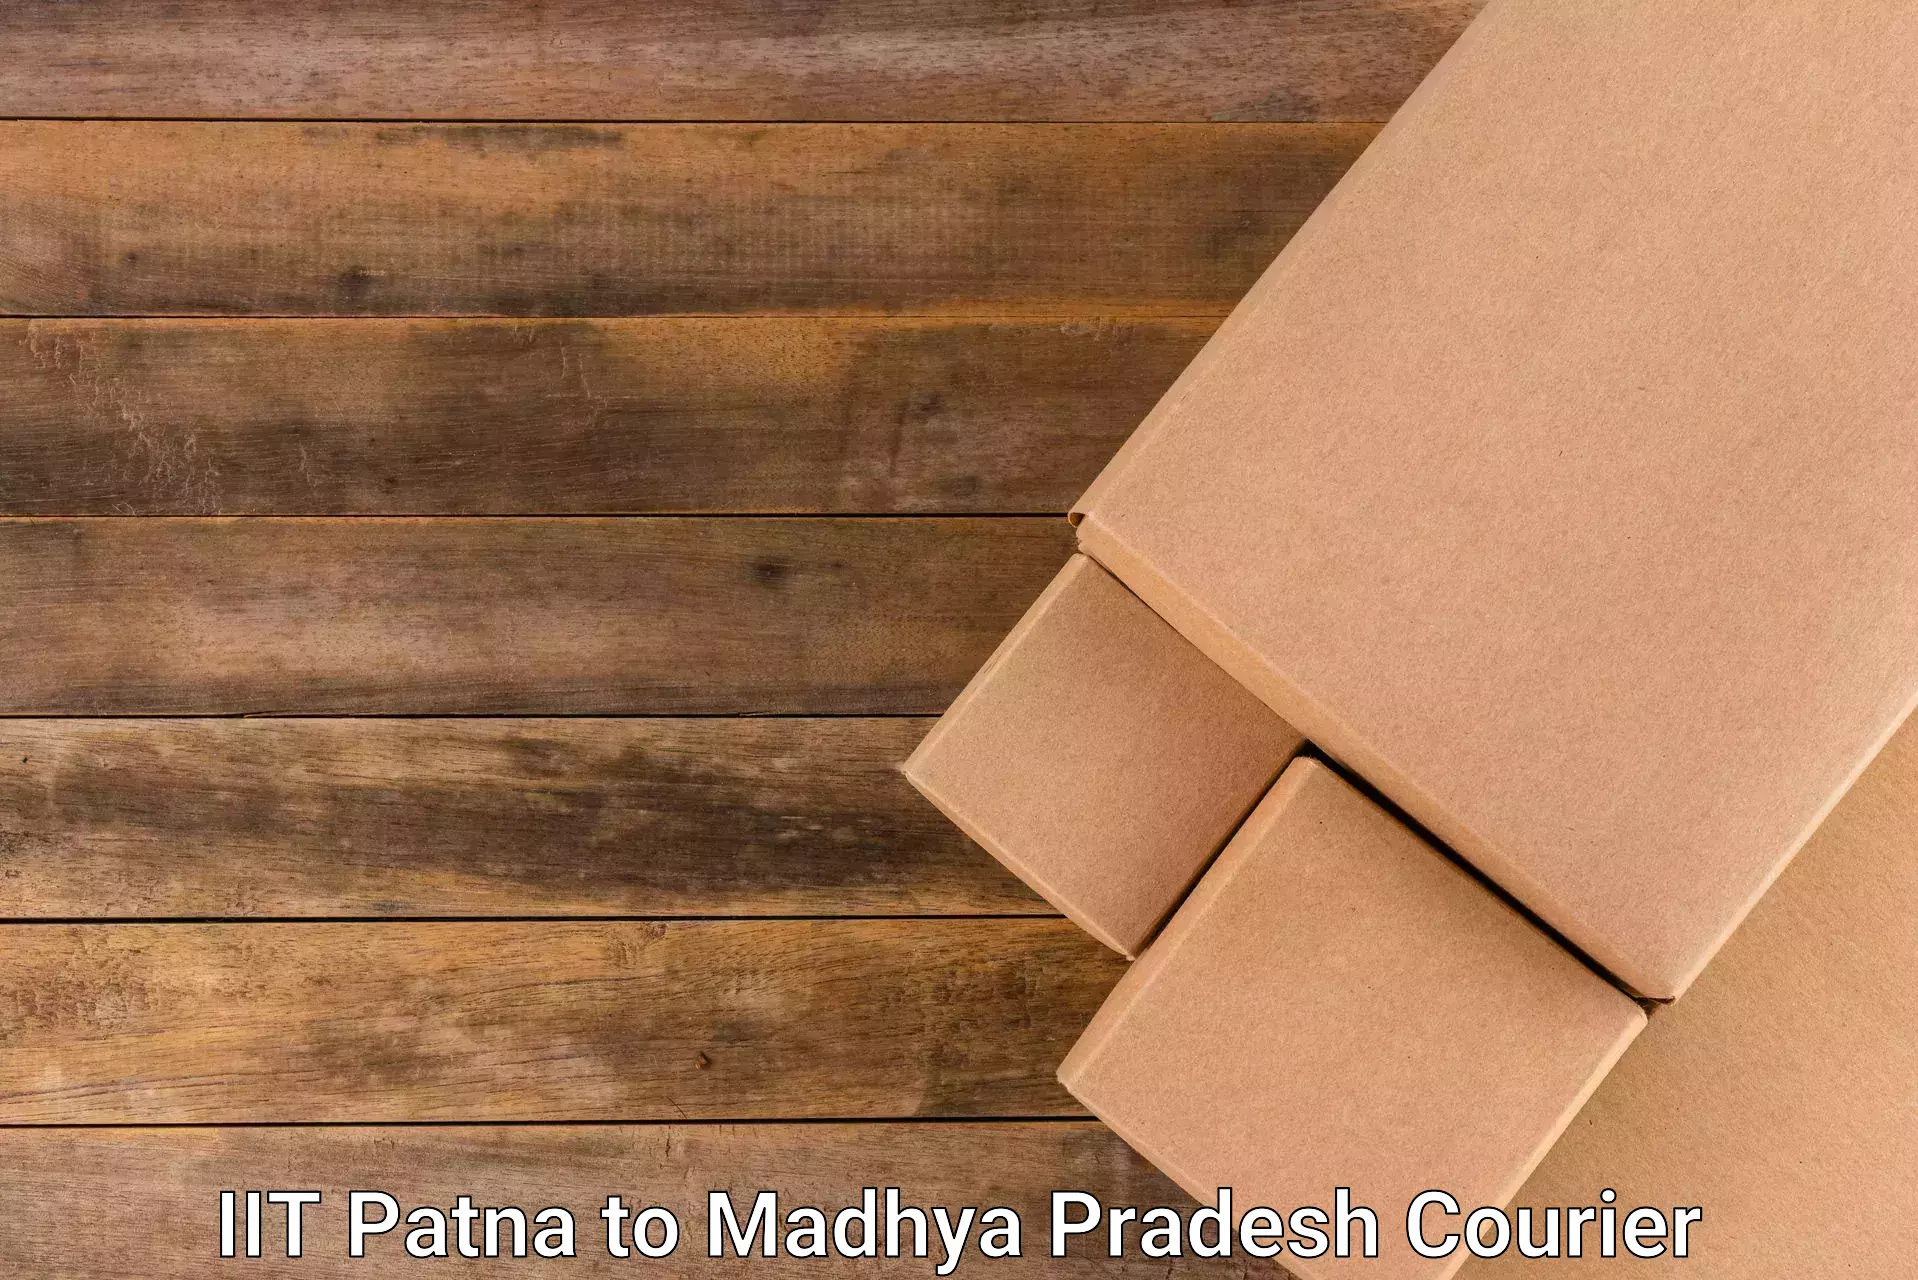 On-call courier service IIT Patna to Shivpuri